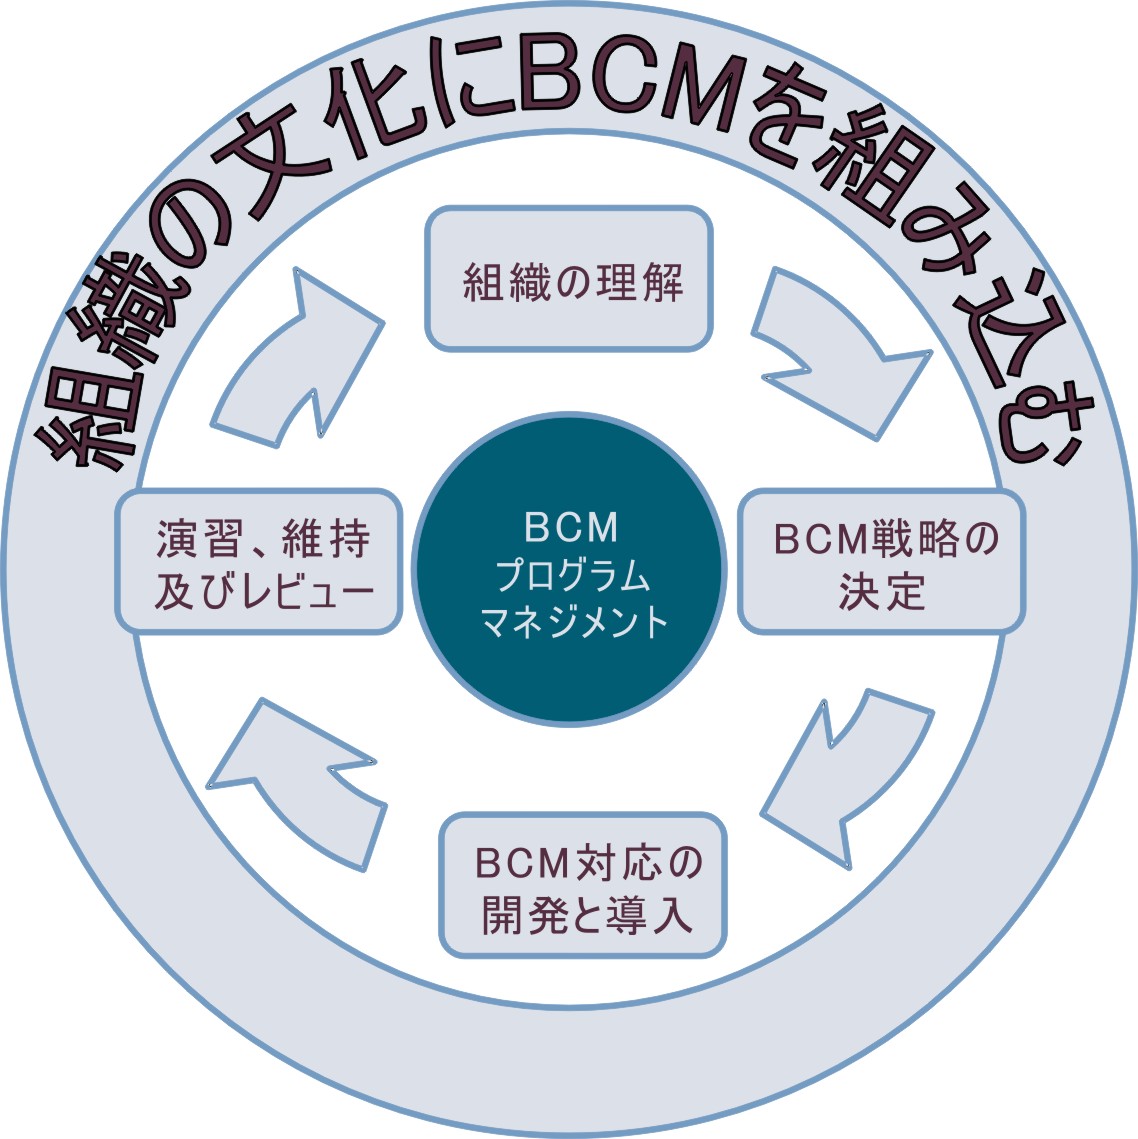 BCMS Life Cycle